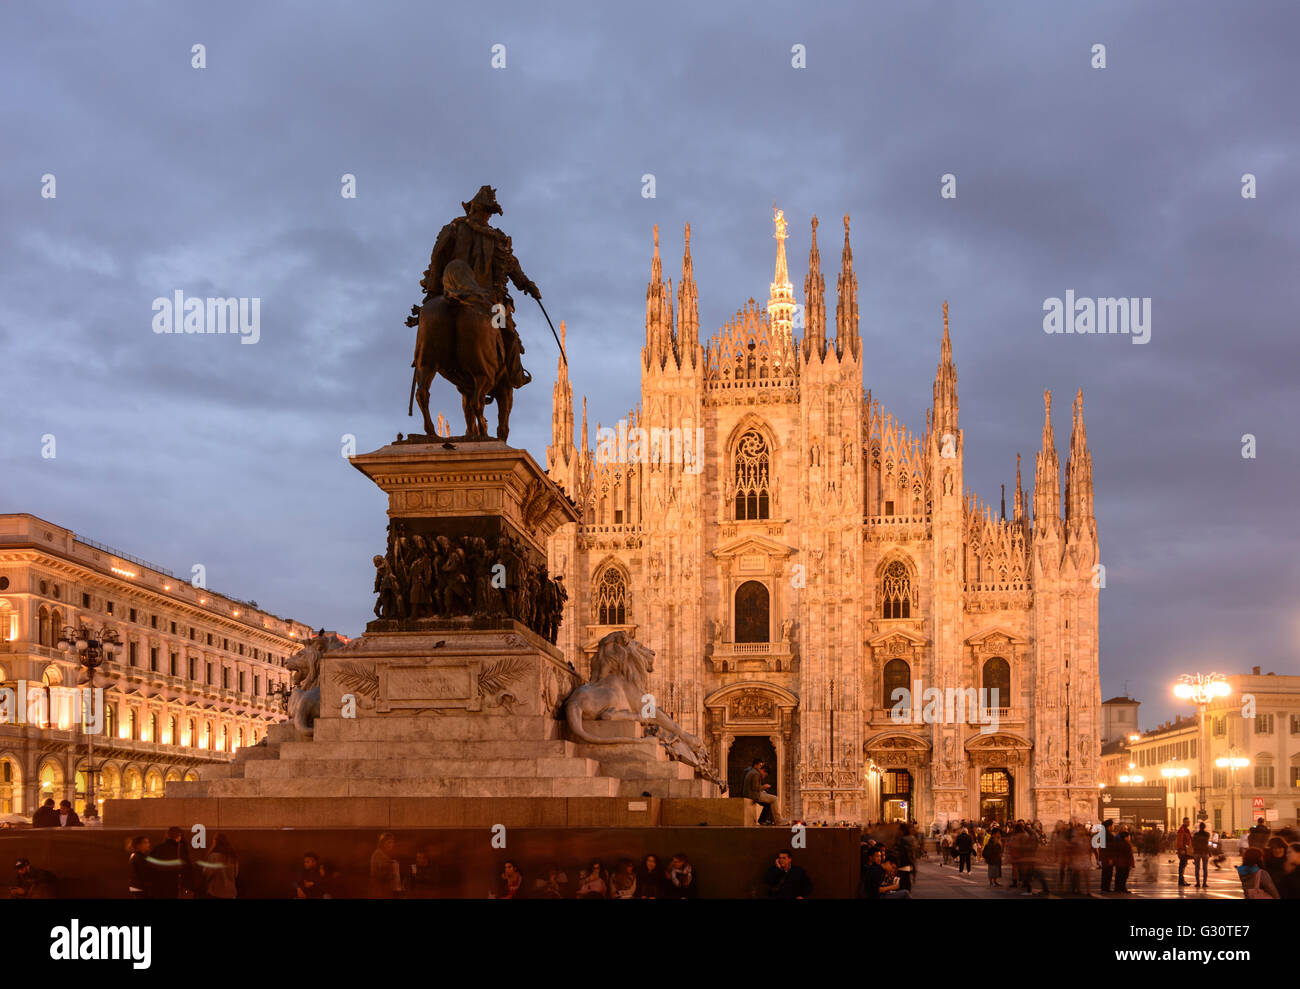 Piazza del Duomo with cathedral and equestrian statue of Vittorio Emanuele II ., Italy, Lombardei, Lombardy, , Mailand, Milan Stock Photo